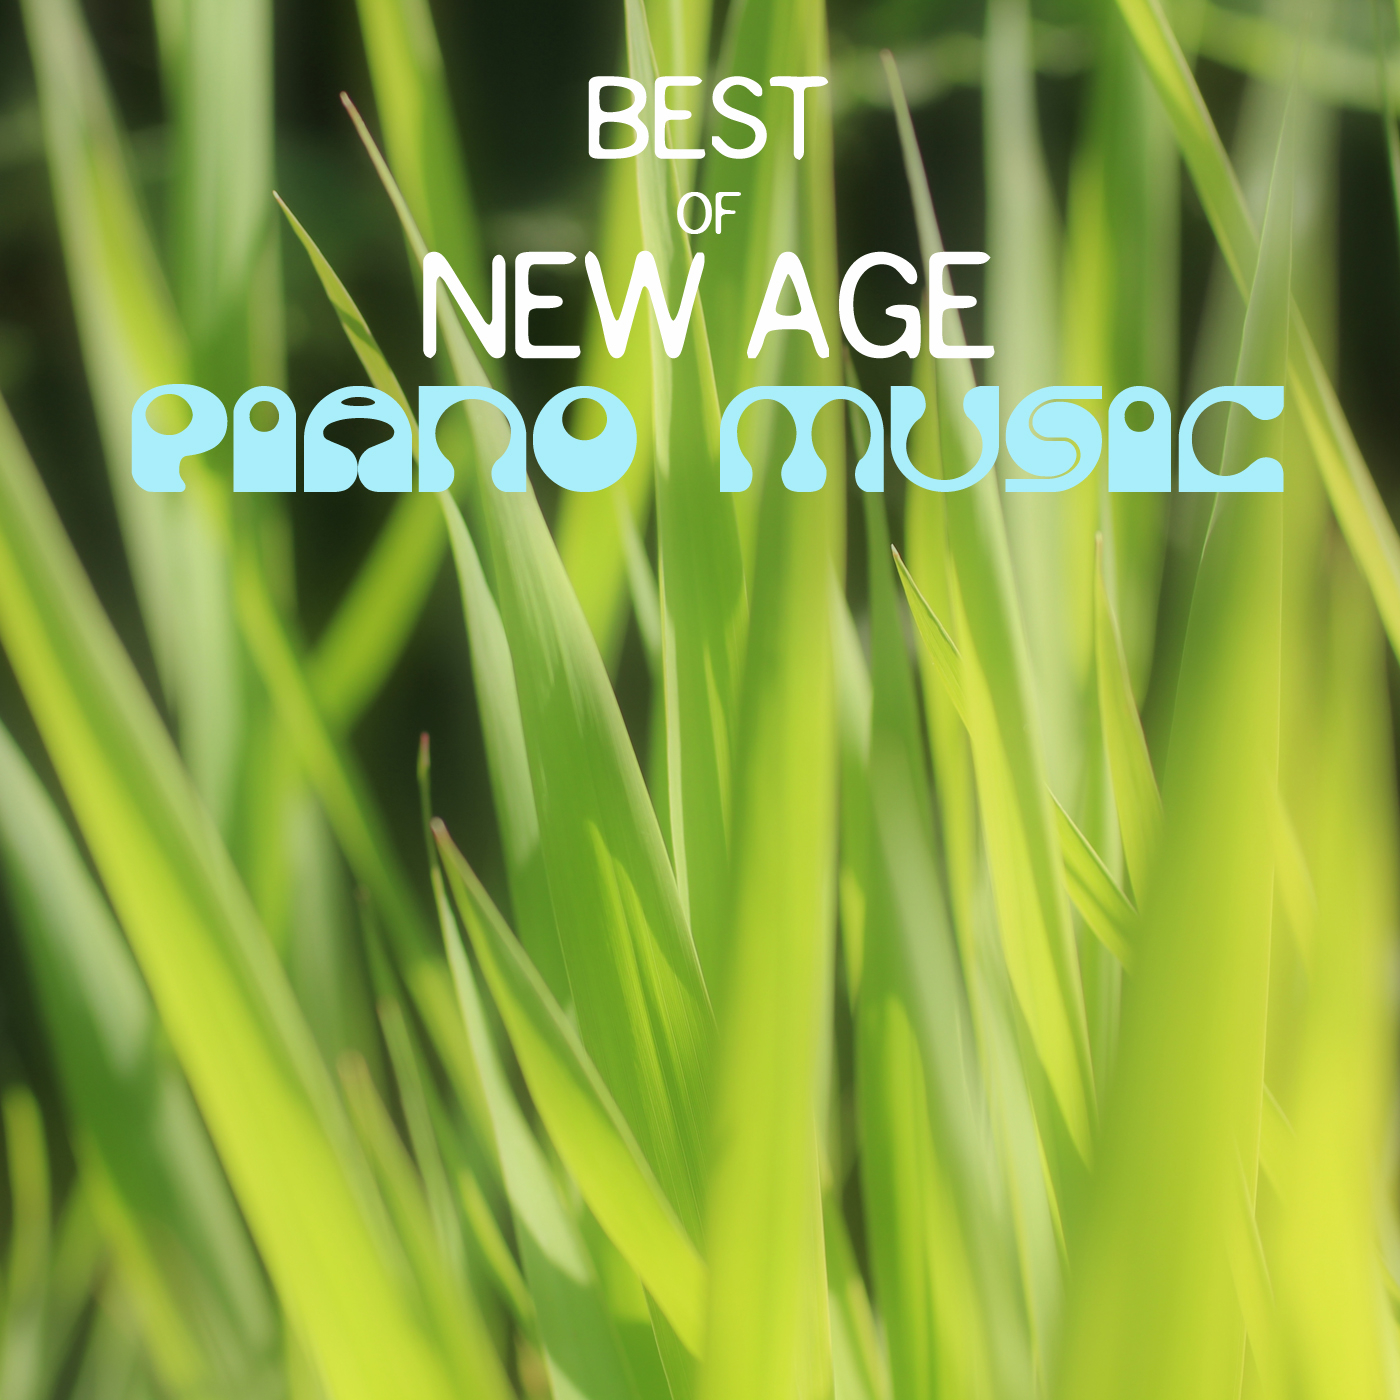 New Age Piano Music - Best of New Age Piano Music and Songs, Relaxing Solo New Age Piano Music Songs